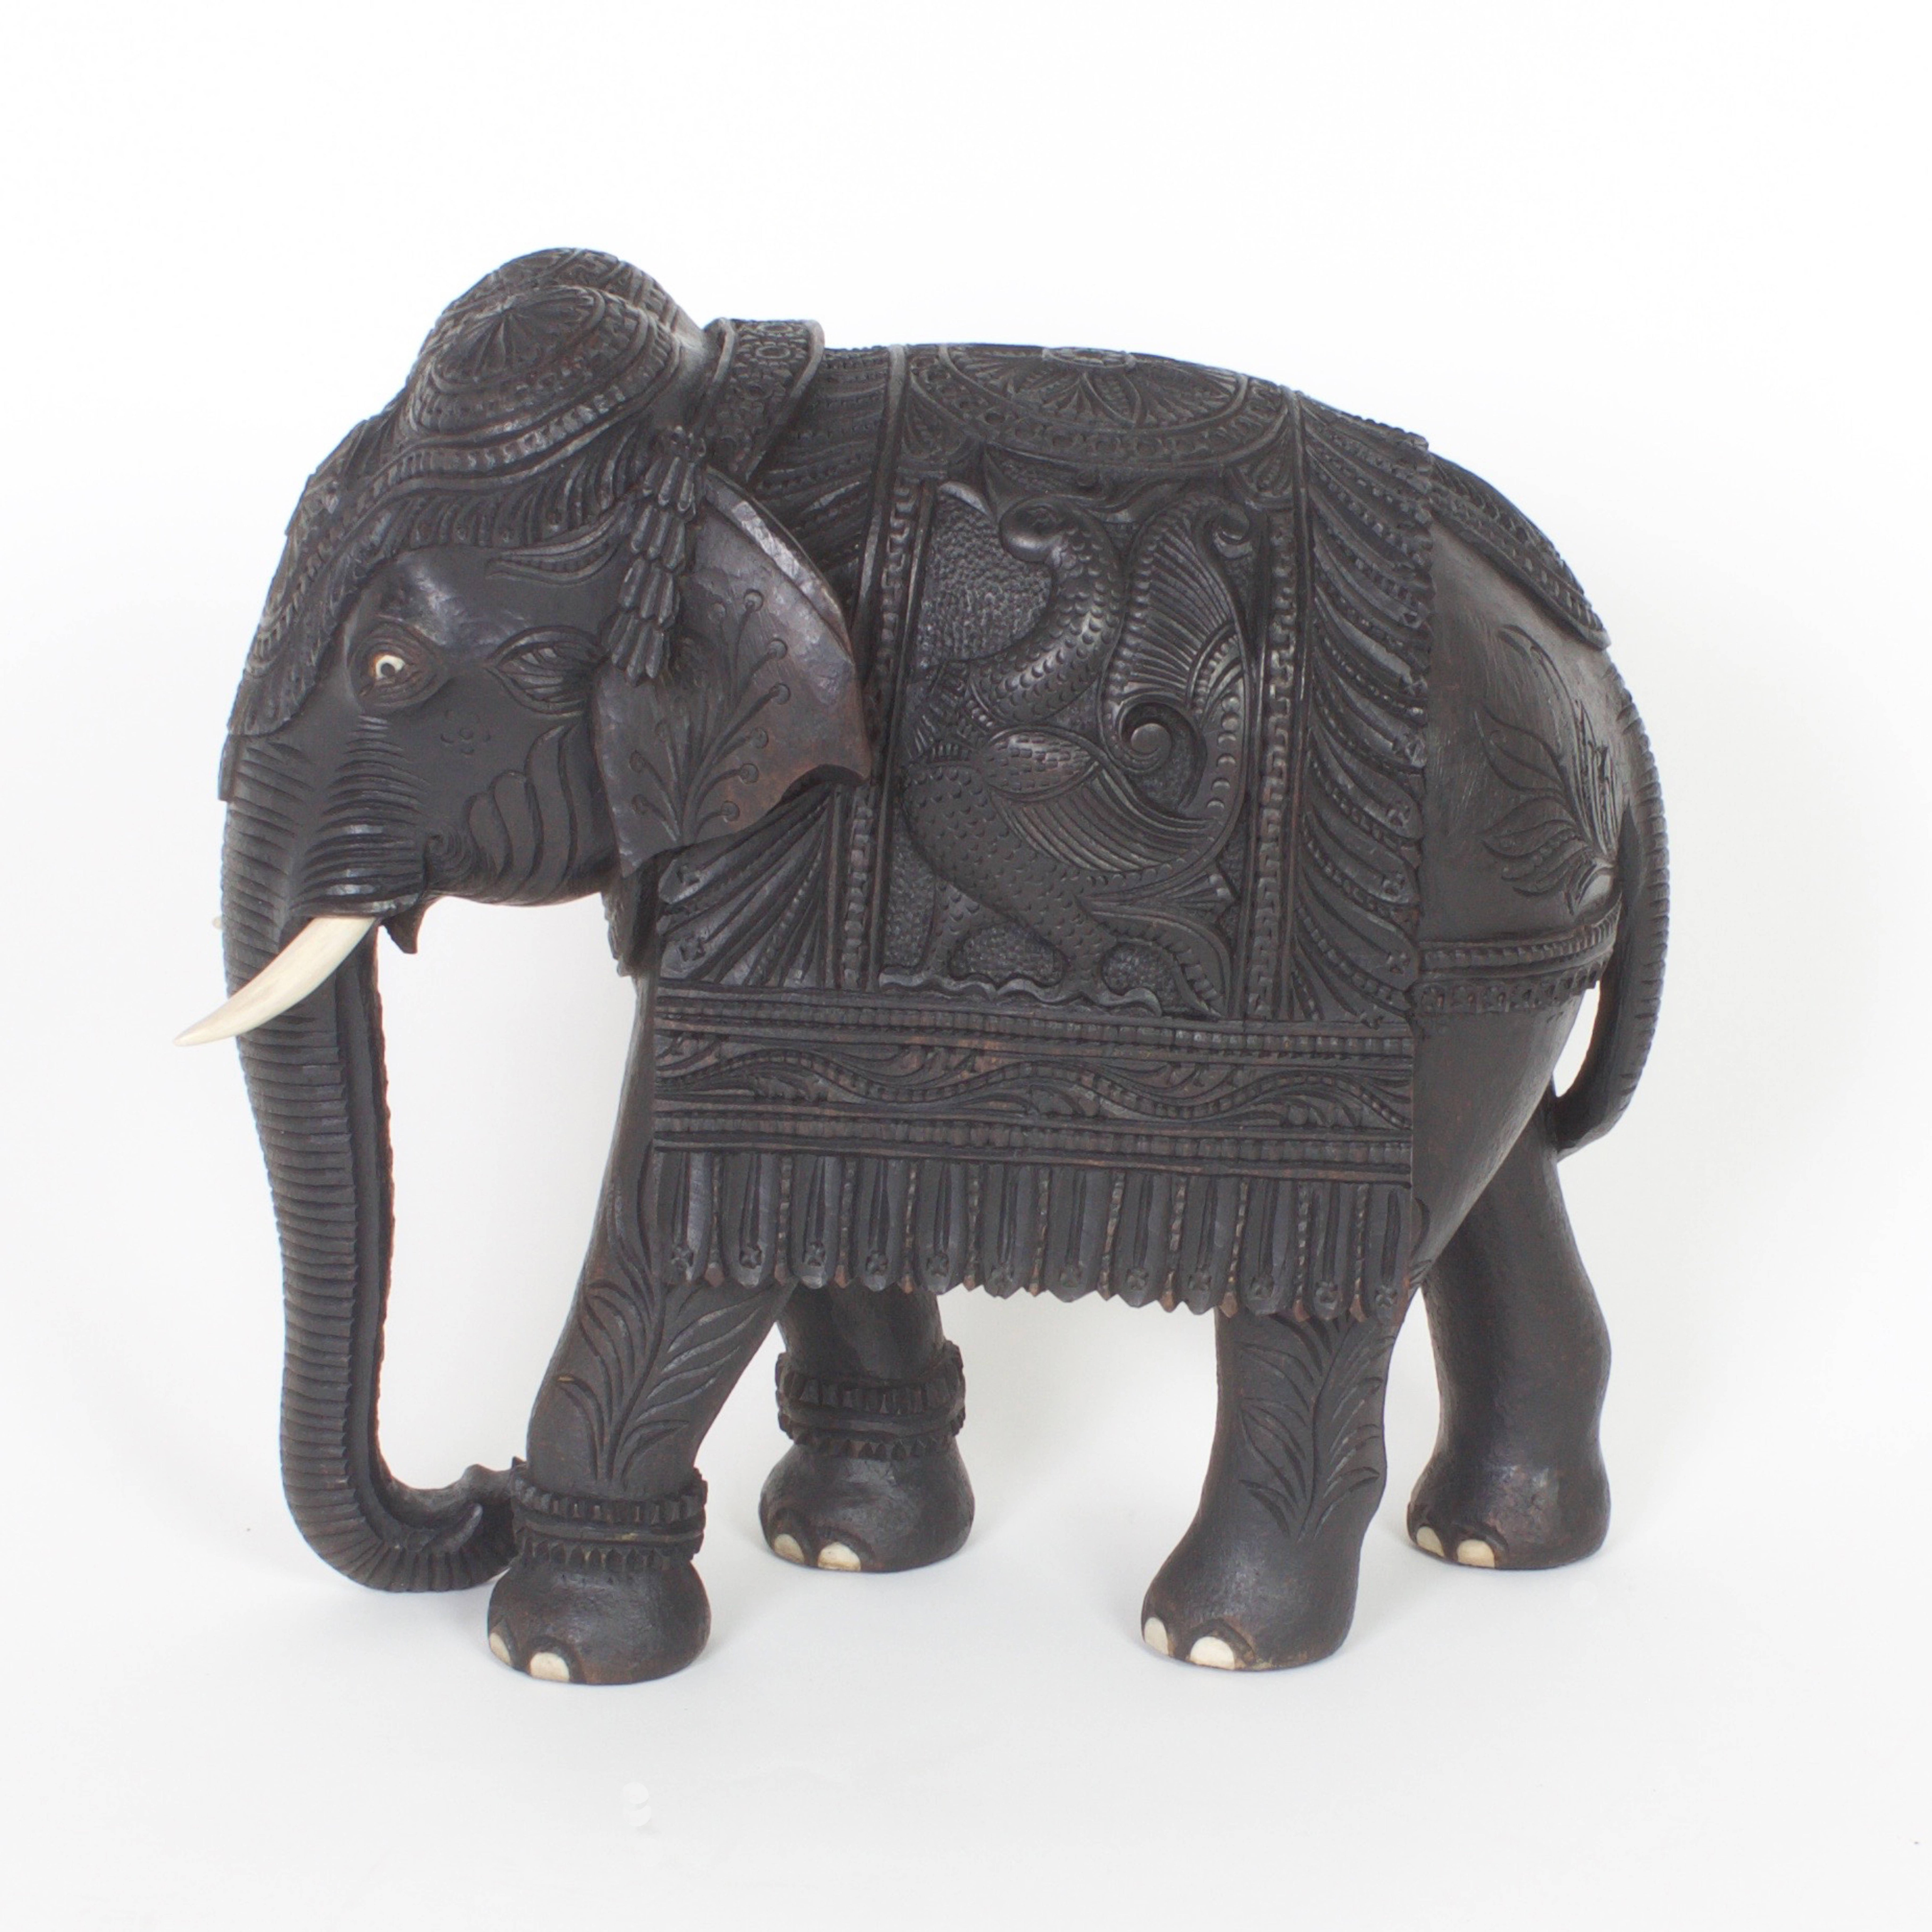 20th Century Antique Carved Anglo-Indian Elephant Figure